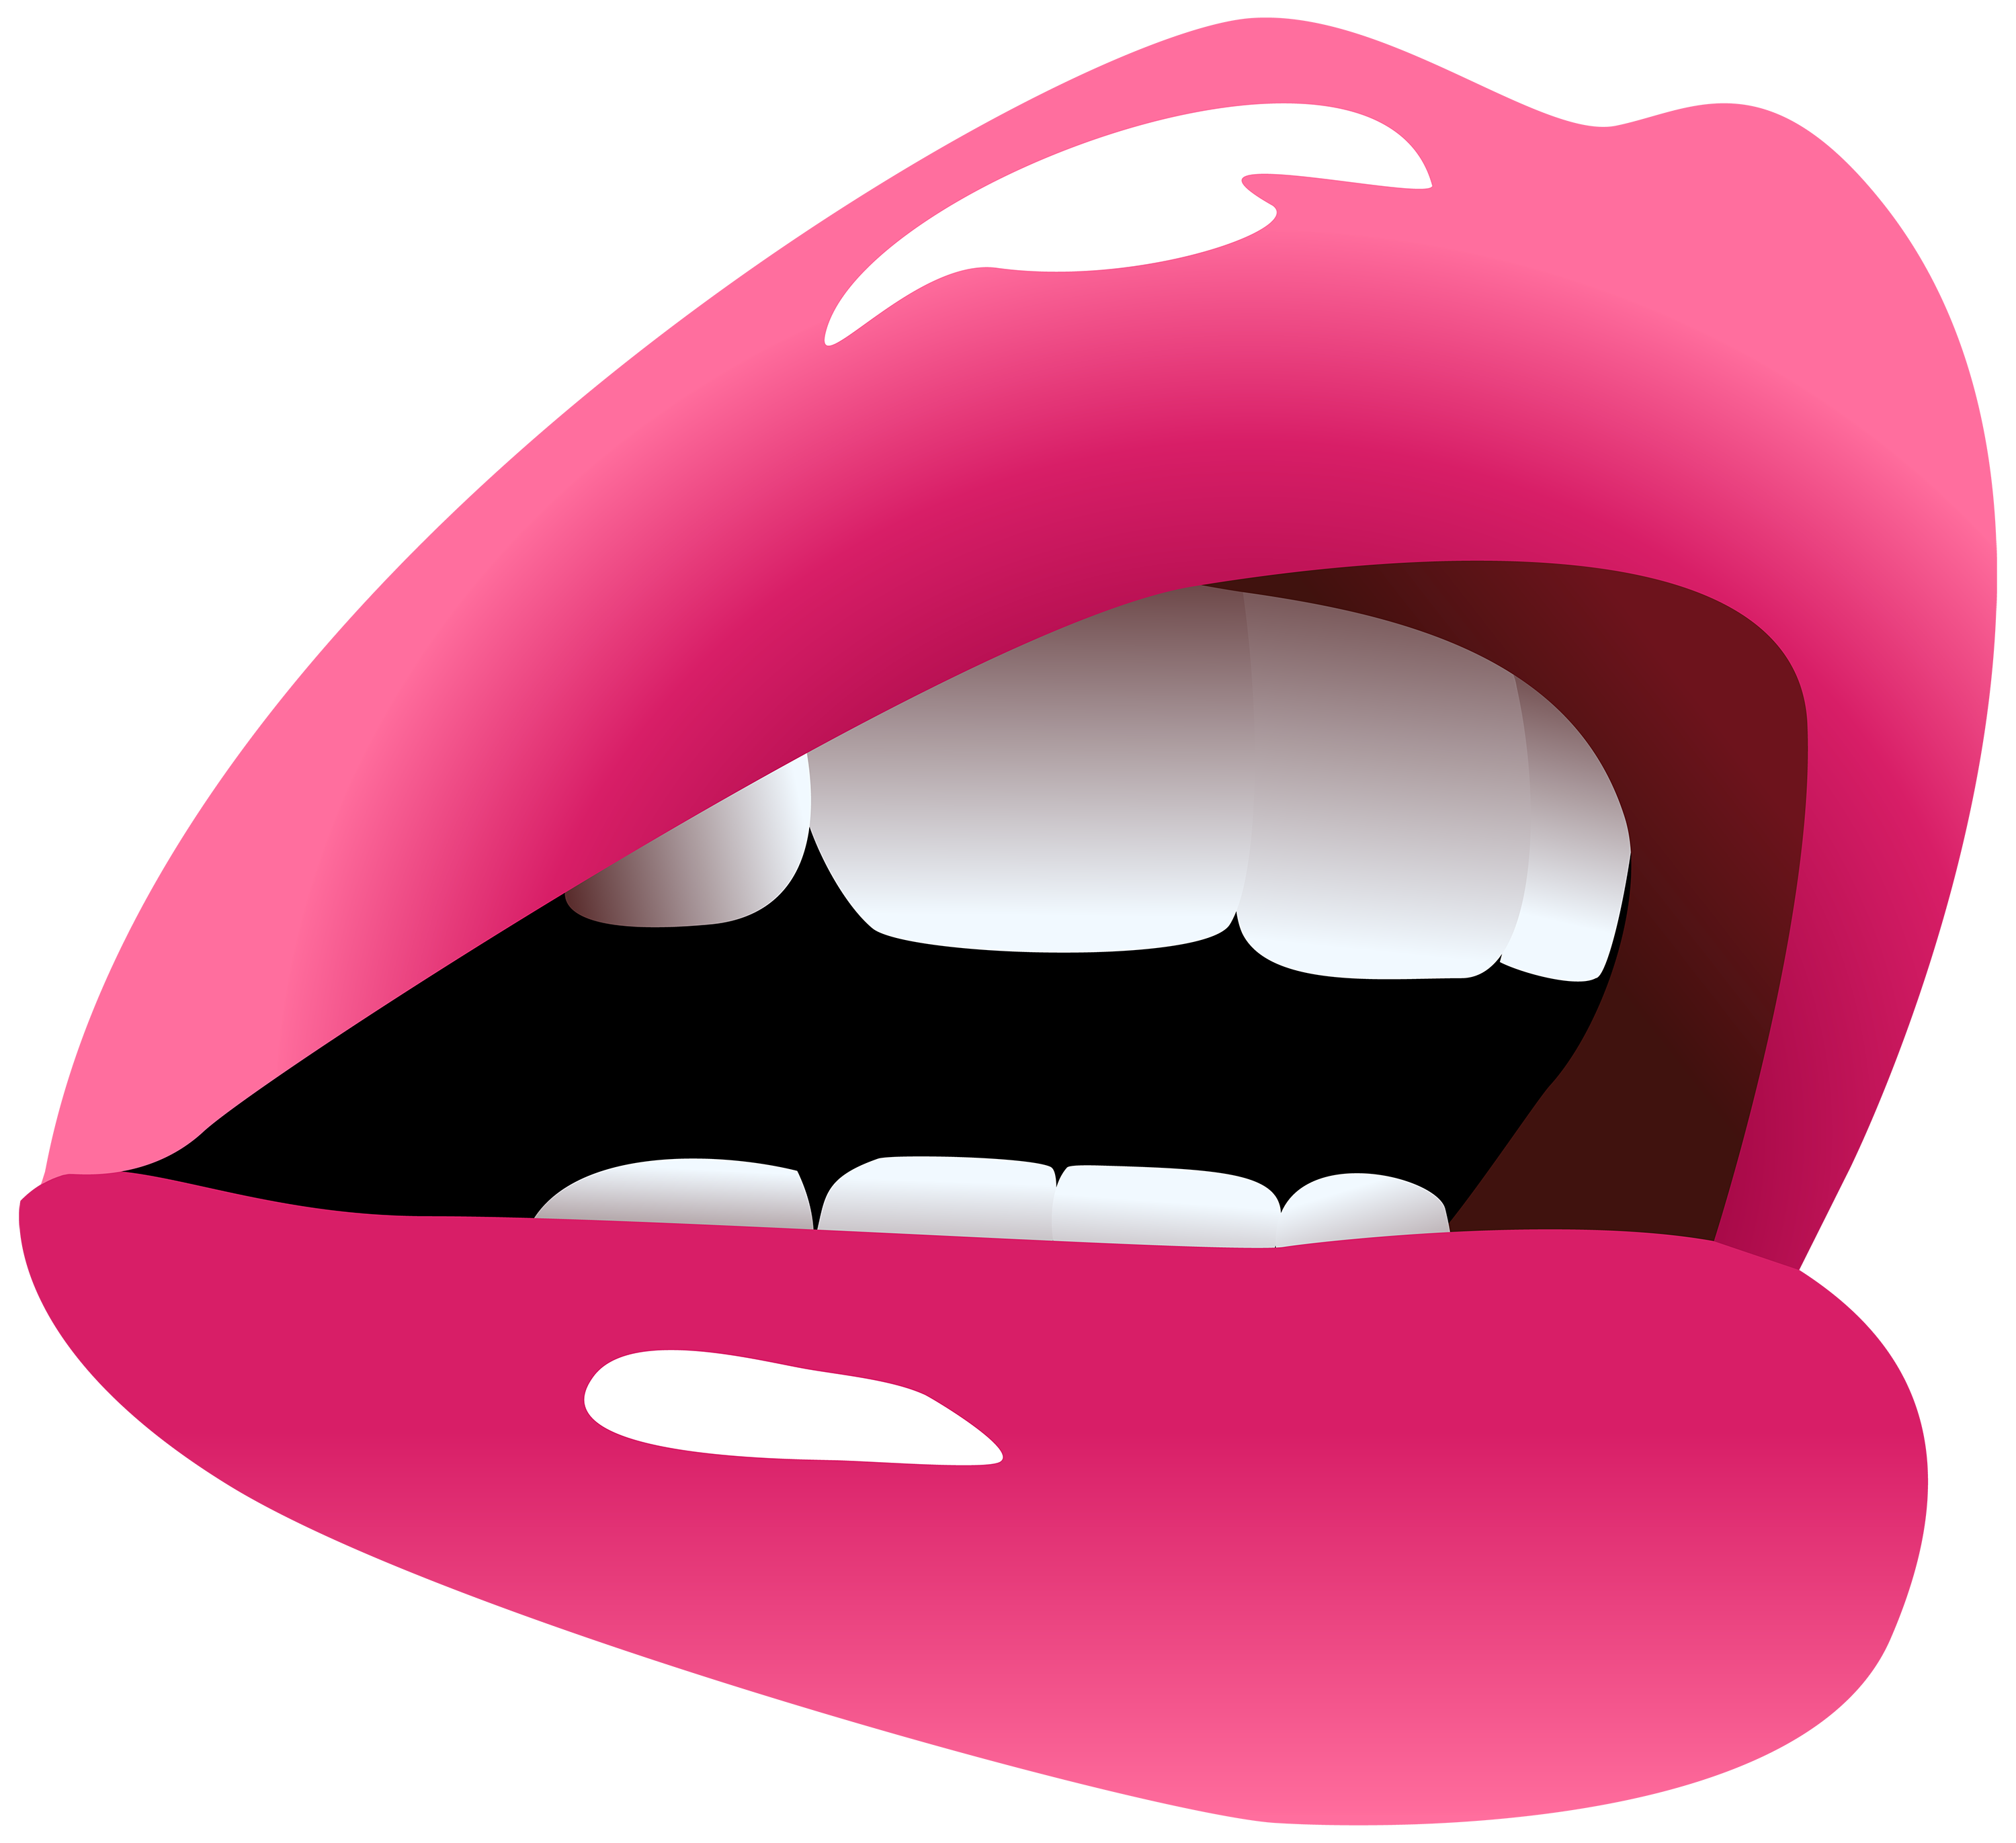 Mouth at getdrawings com. Highway clipart open road